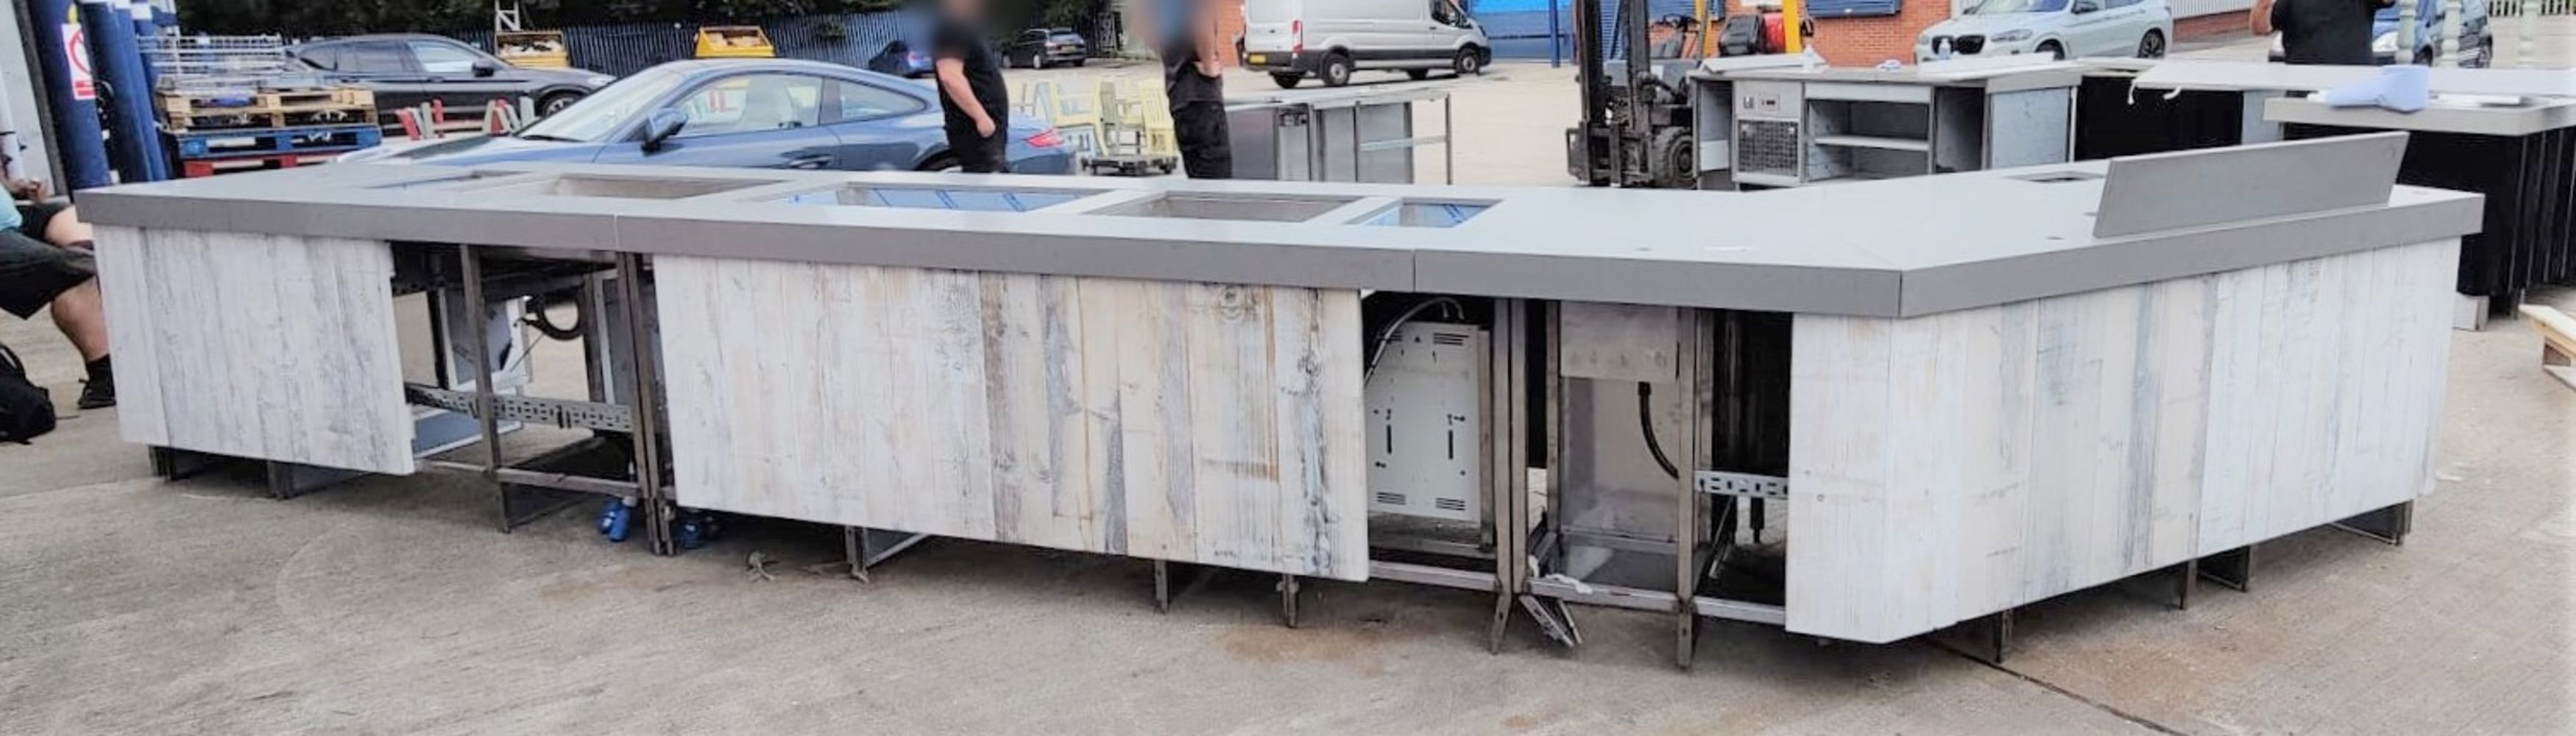 Commercial Catering Auction Featuring Bespoke Retail Coffee Shop Counters, Indoor/Outdoor Commercial Kitchens, Pizza Prep Retail Unit and More!